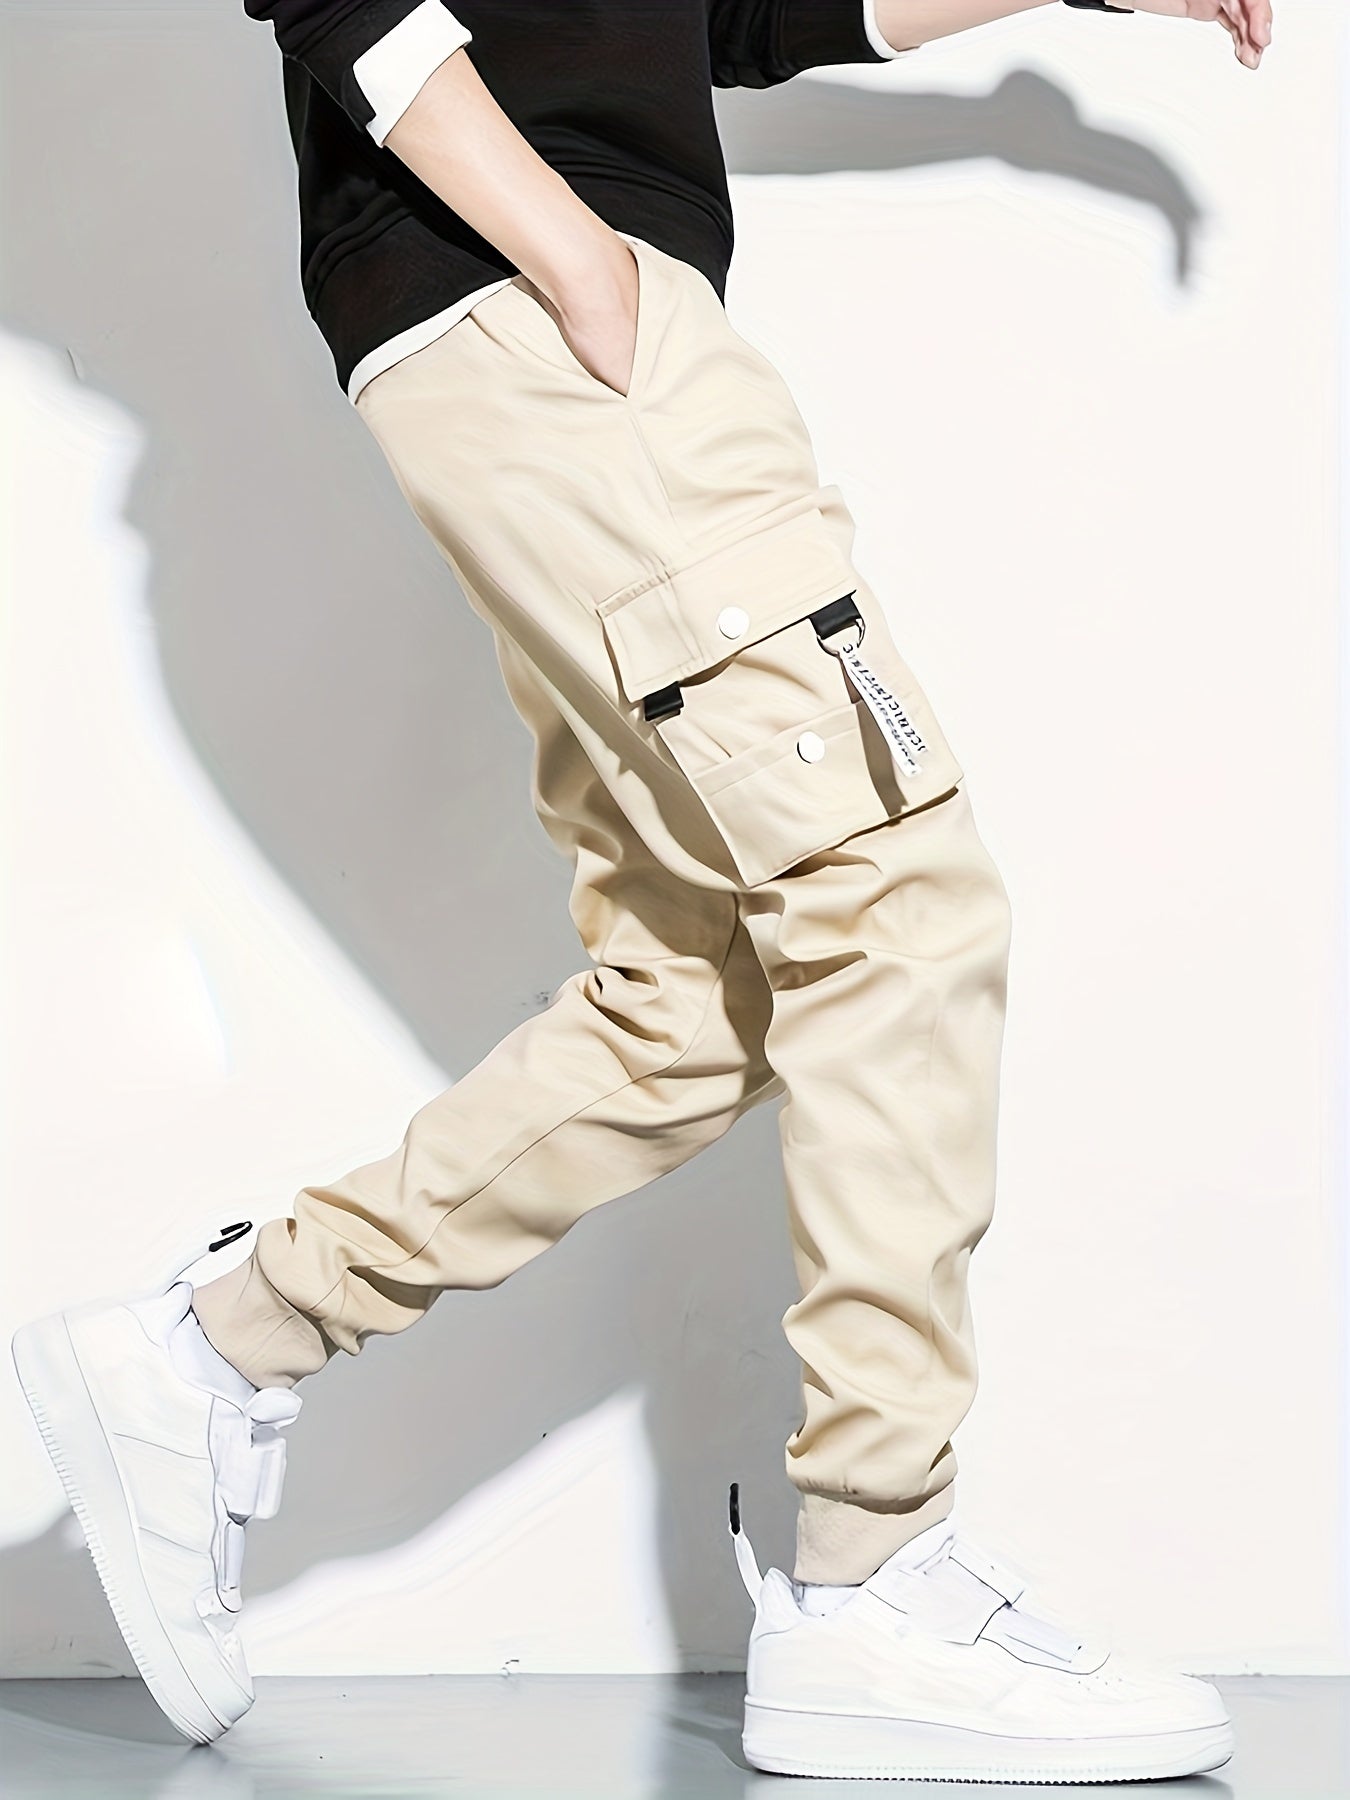 Classic Design Multi Pocket Cargo Pants, Men's Casual Loose Fit Drawstring Cargo Pants/Joggers For Spring Summer Outdoor